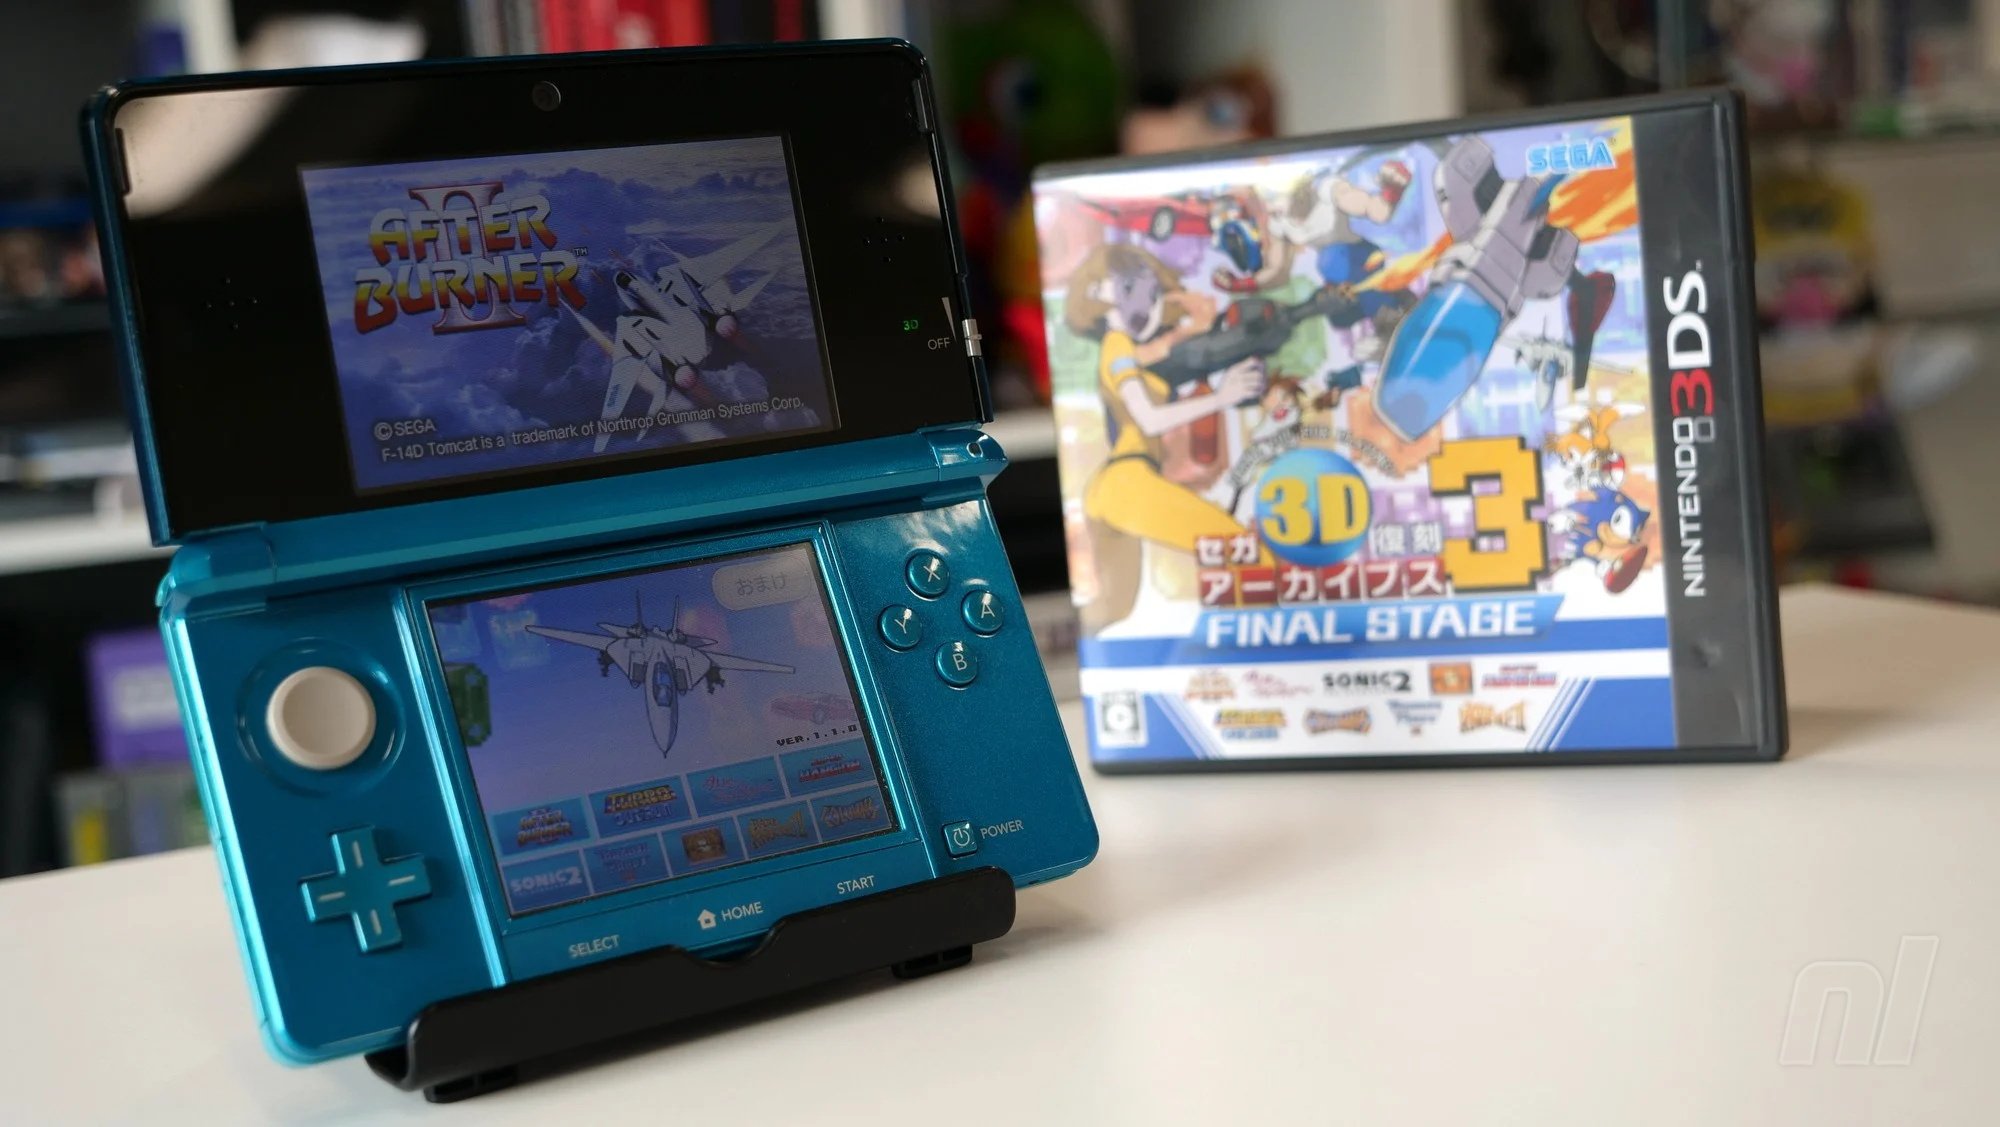 Nintendo Will Stop Repairing Original 3ds And 3ds Xl Consoles Next Month Due To Parts Shortage Nintendo Life